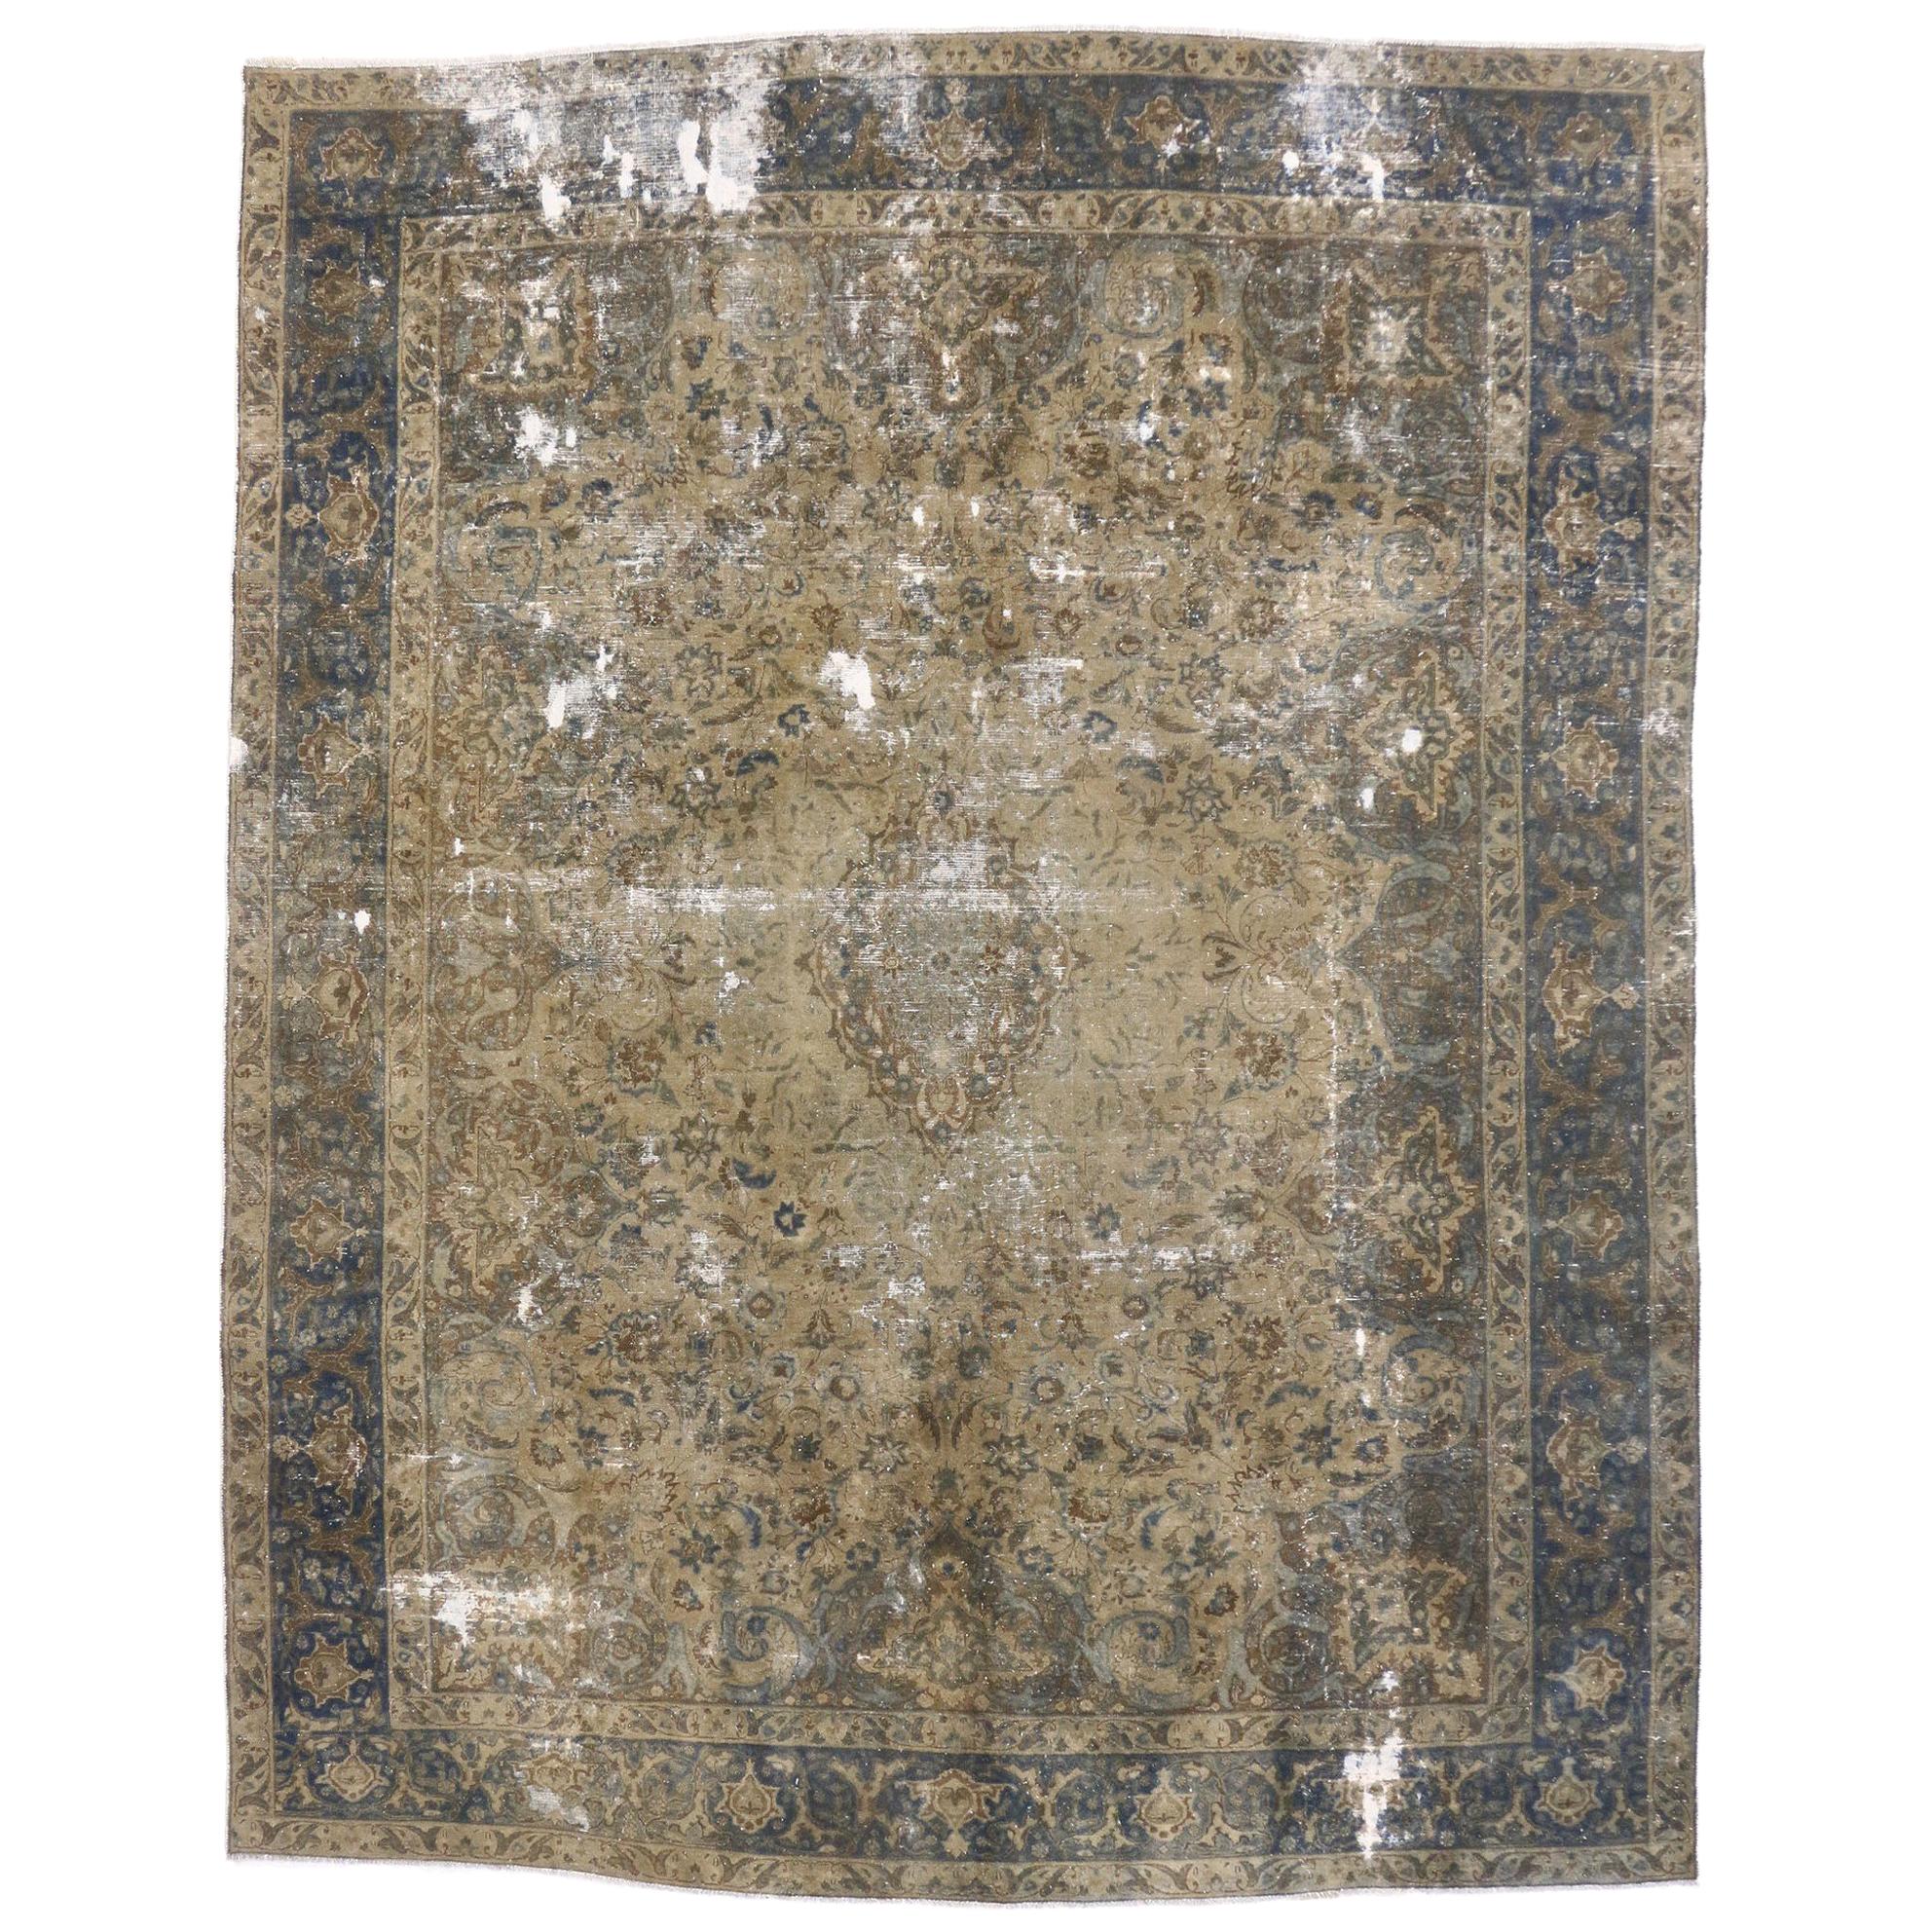 Vintage Distressed Turkish Industrial Area Rug with Rustic Gustavian Style